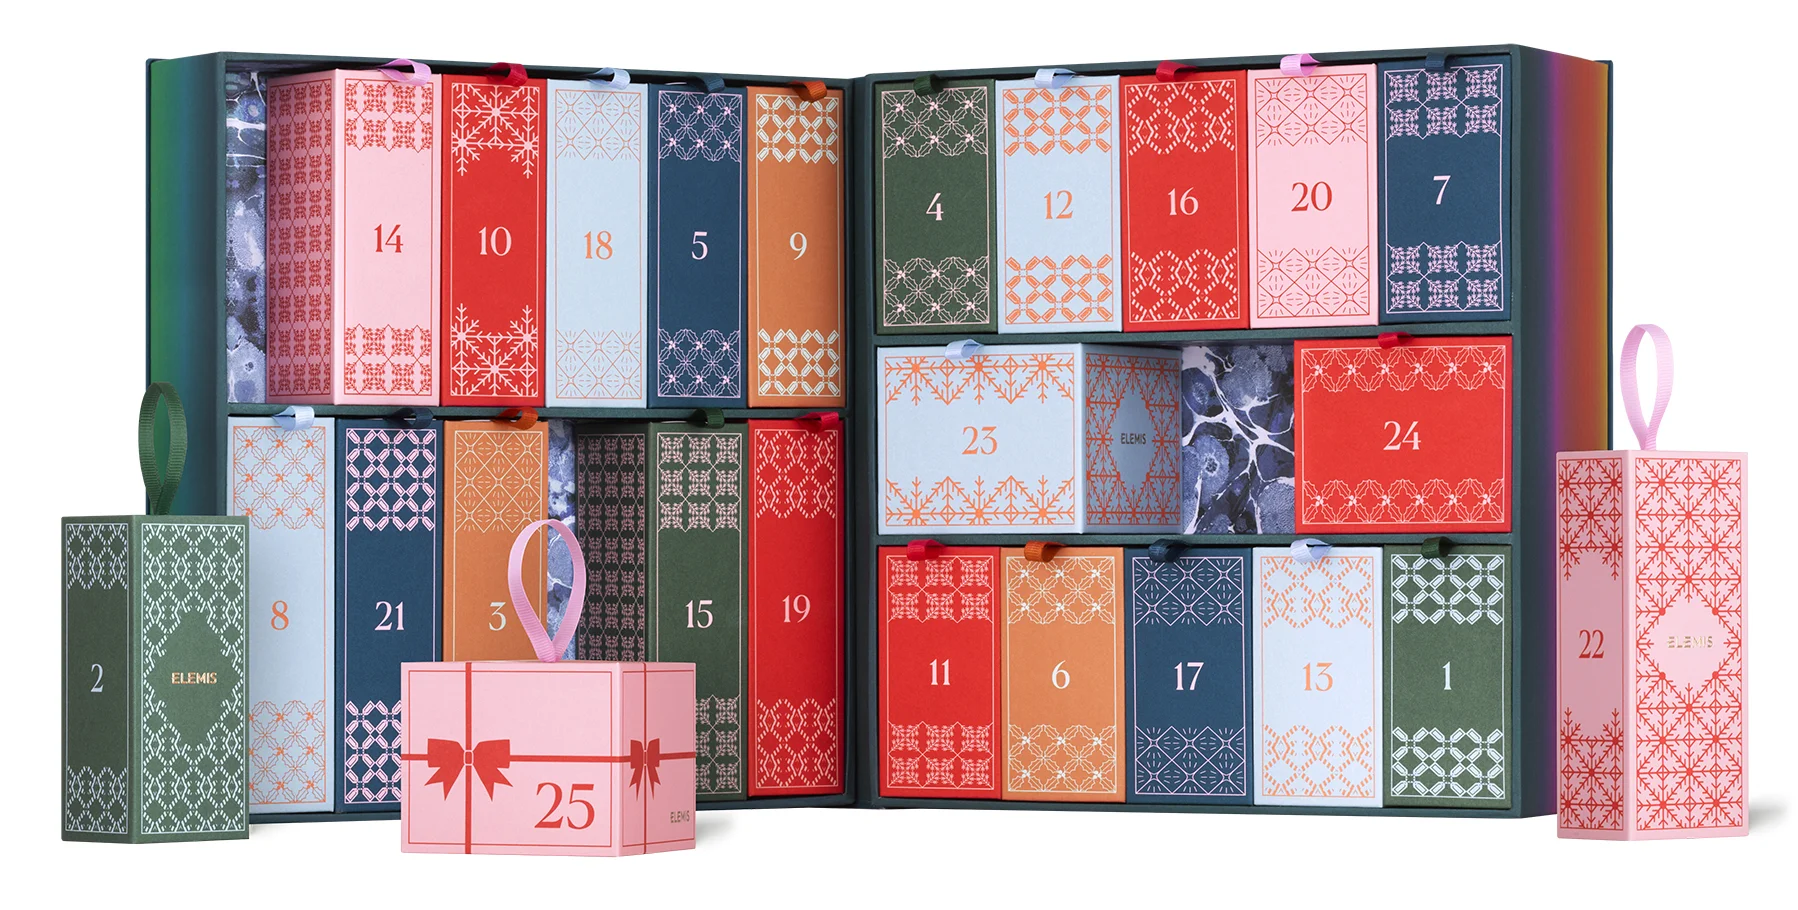 2022 Elemis Advent Calendar: 25 Day Countdown With Your Favorite Skin